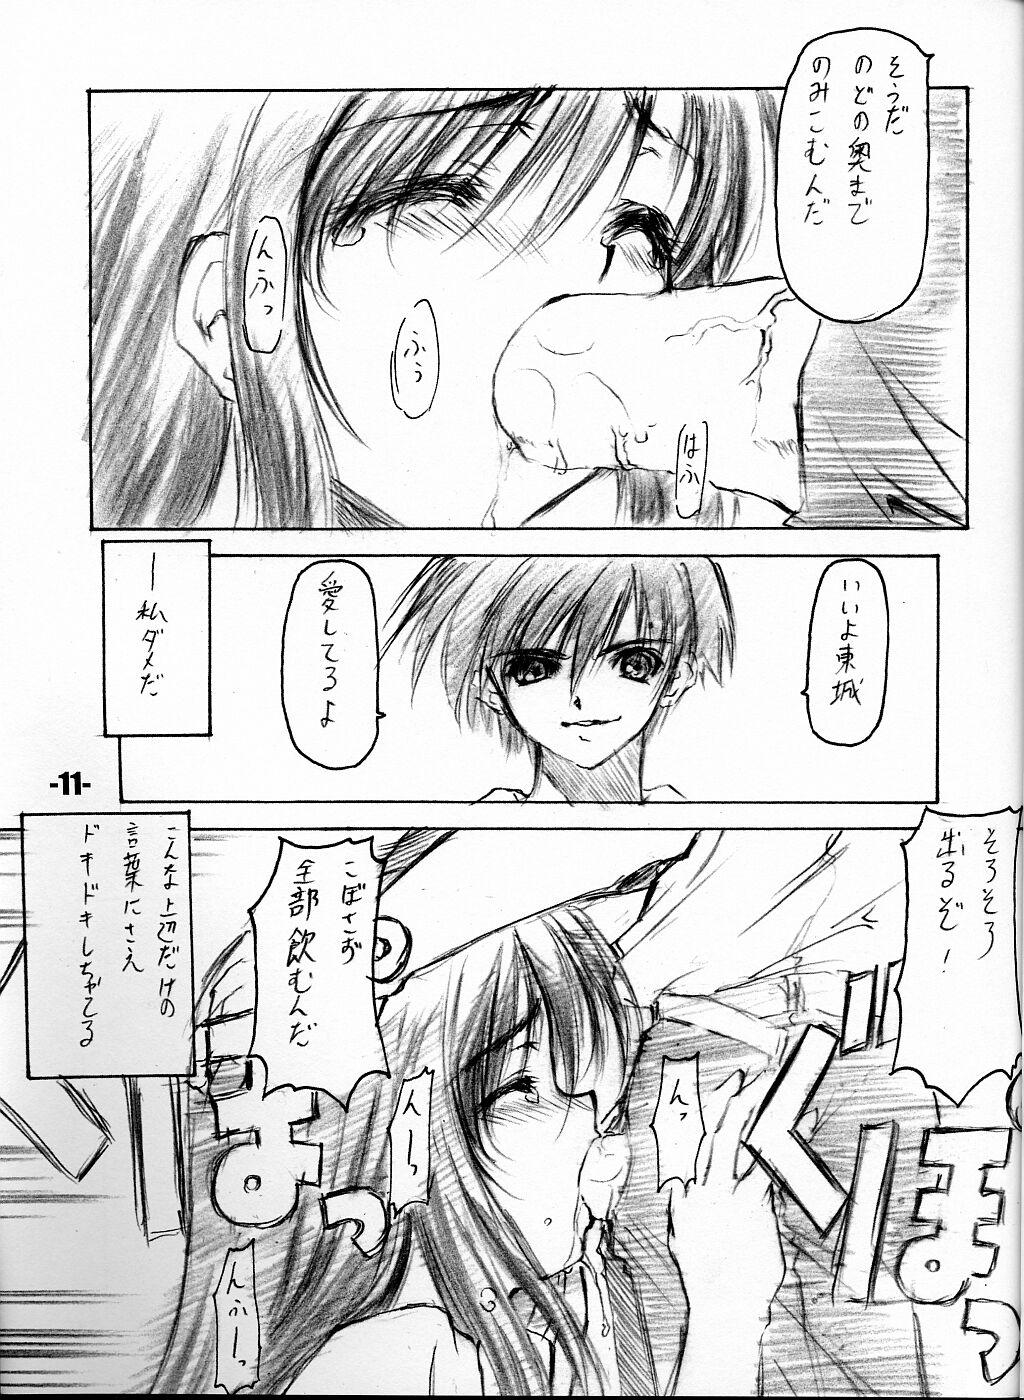 18 Year Old EXtra stage vol. 8 - Ichigo 100 Scandal - Page 10